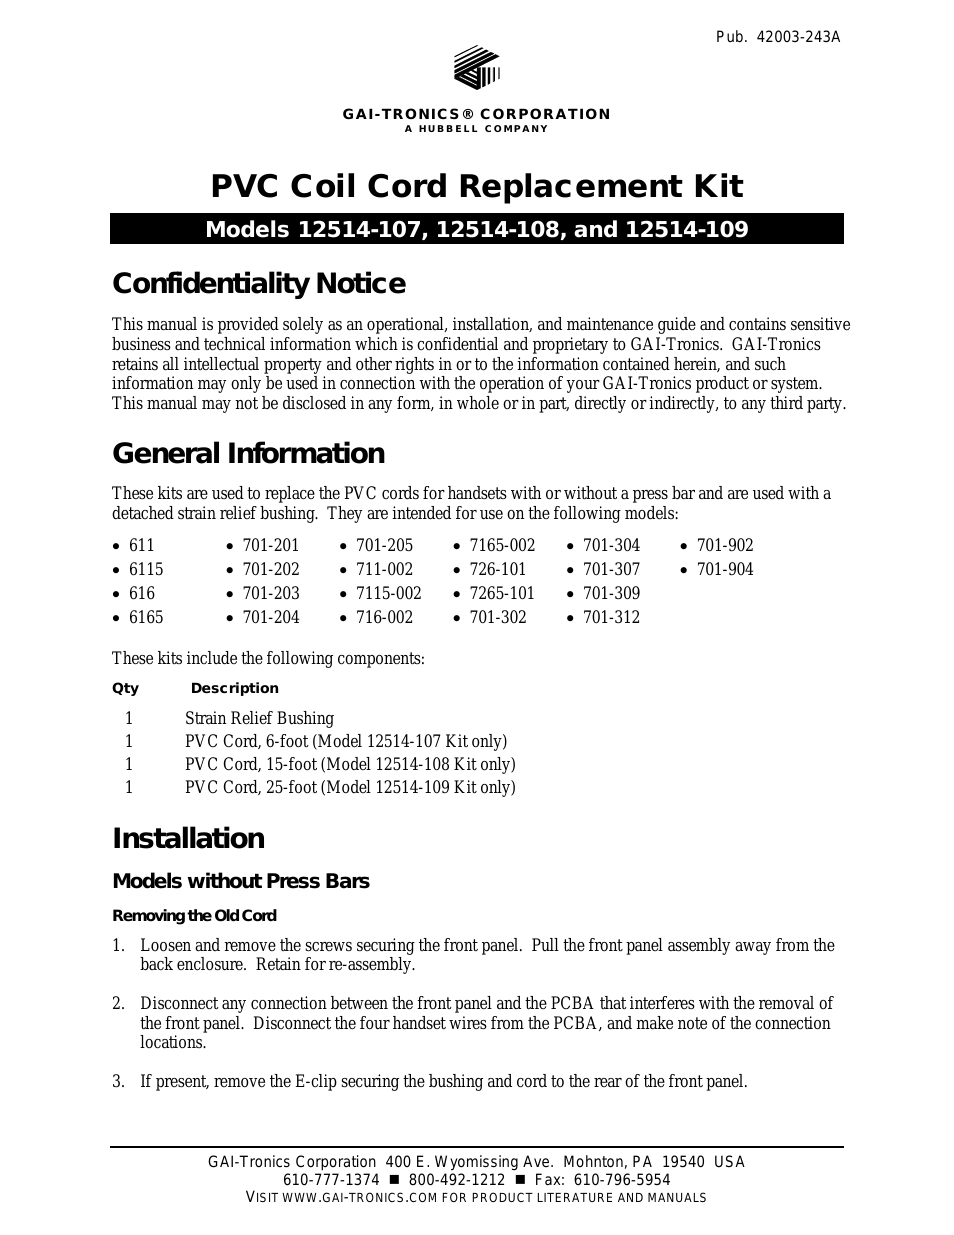 12514-001 and 12514-109 PVC Coil Cord Replacement Kit